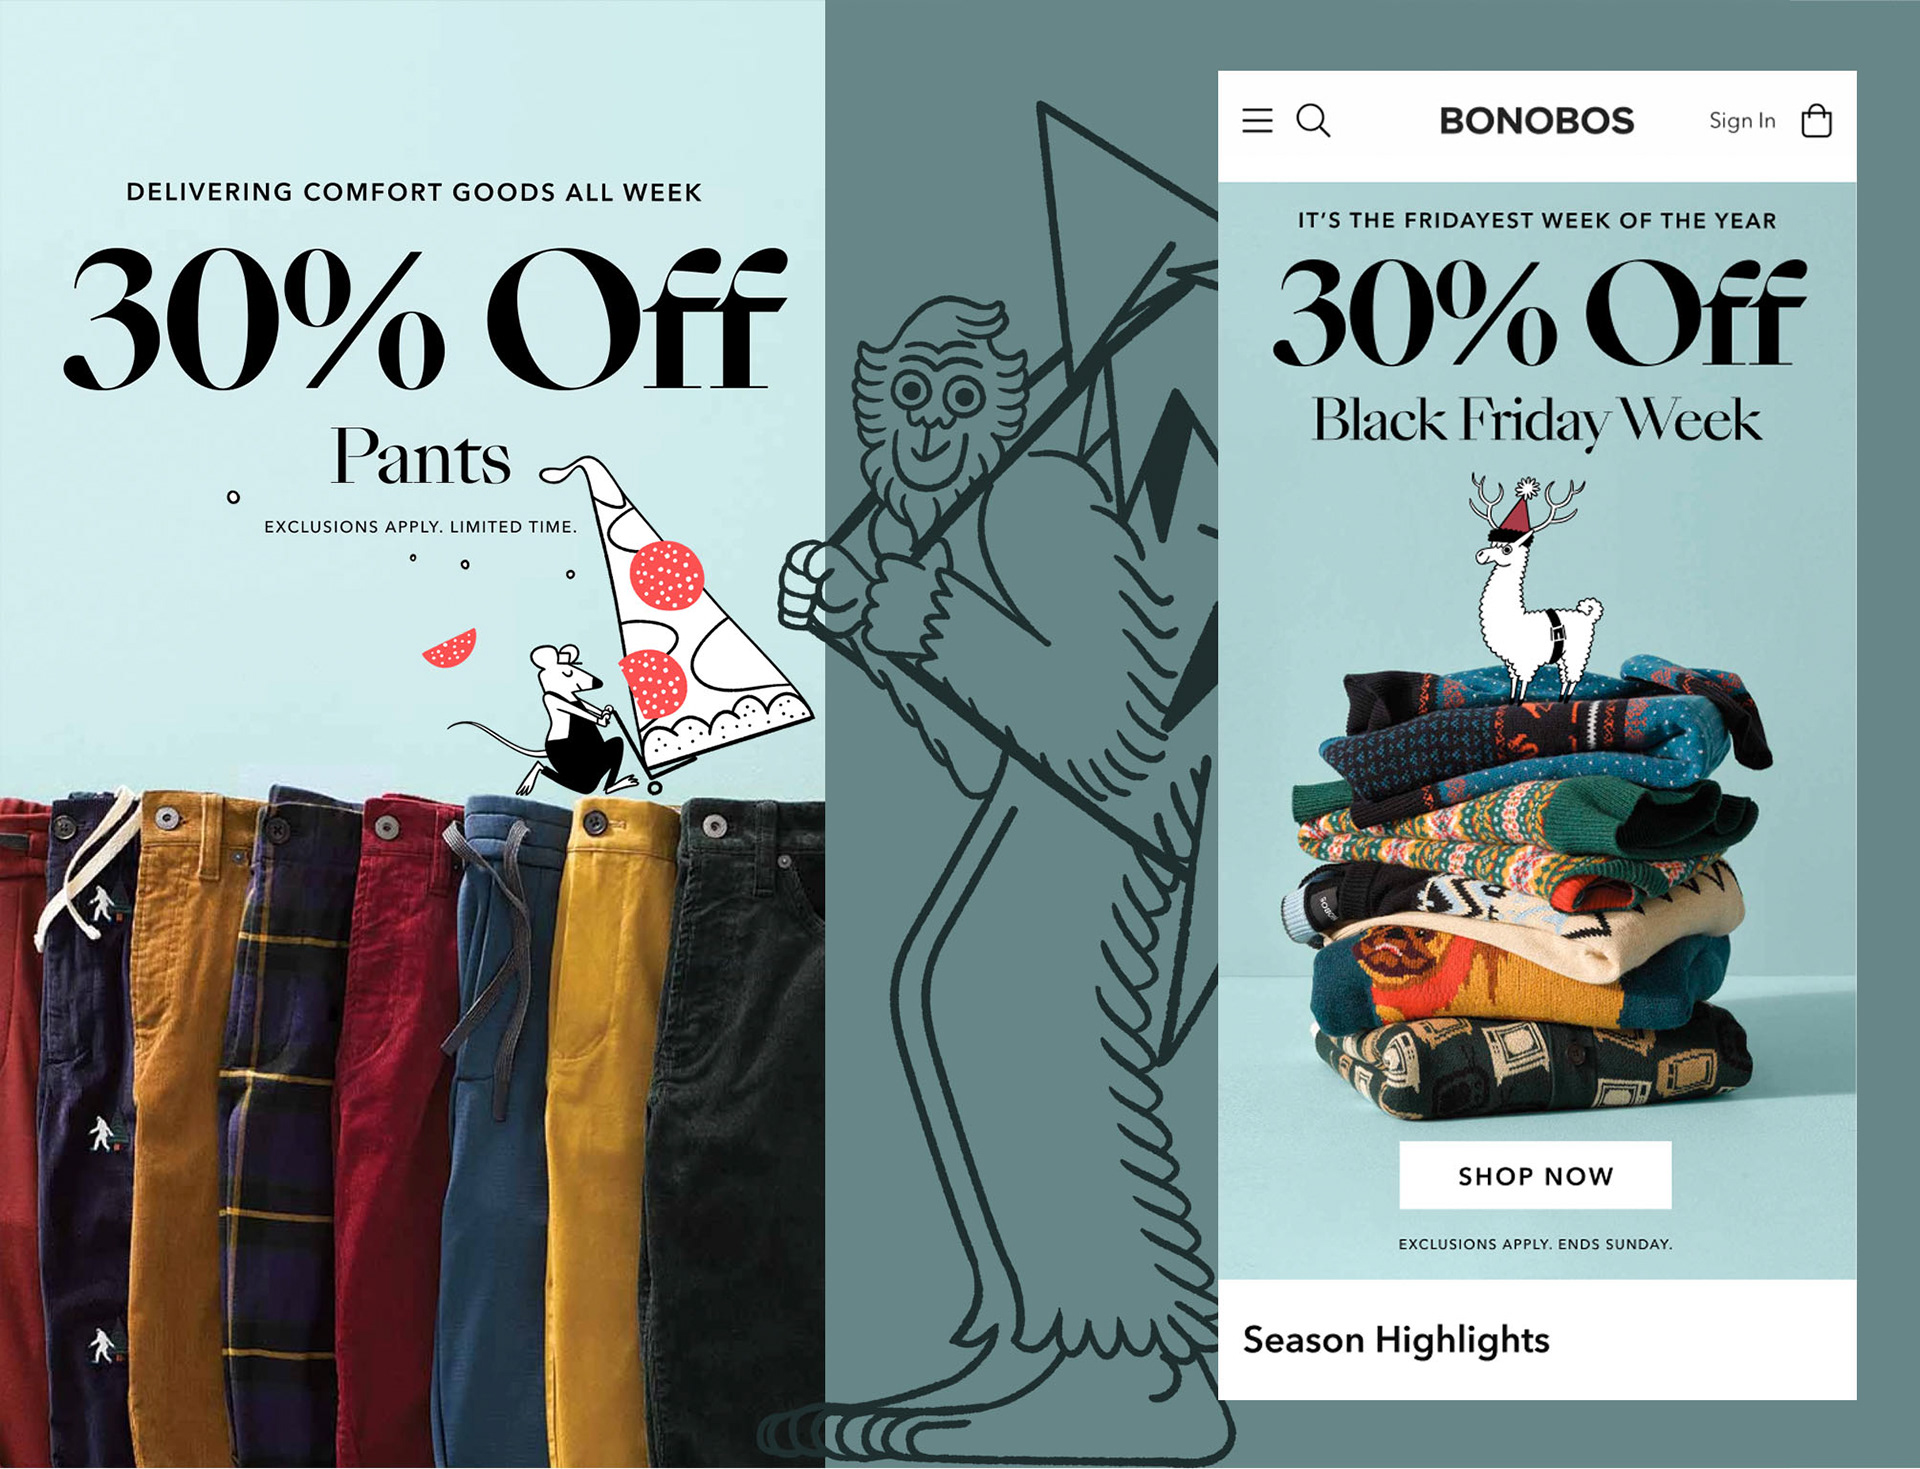 Bonobos' New Ads Show Love for Its Pants